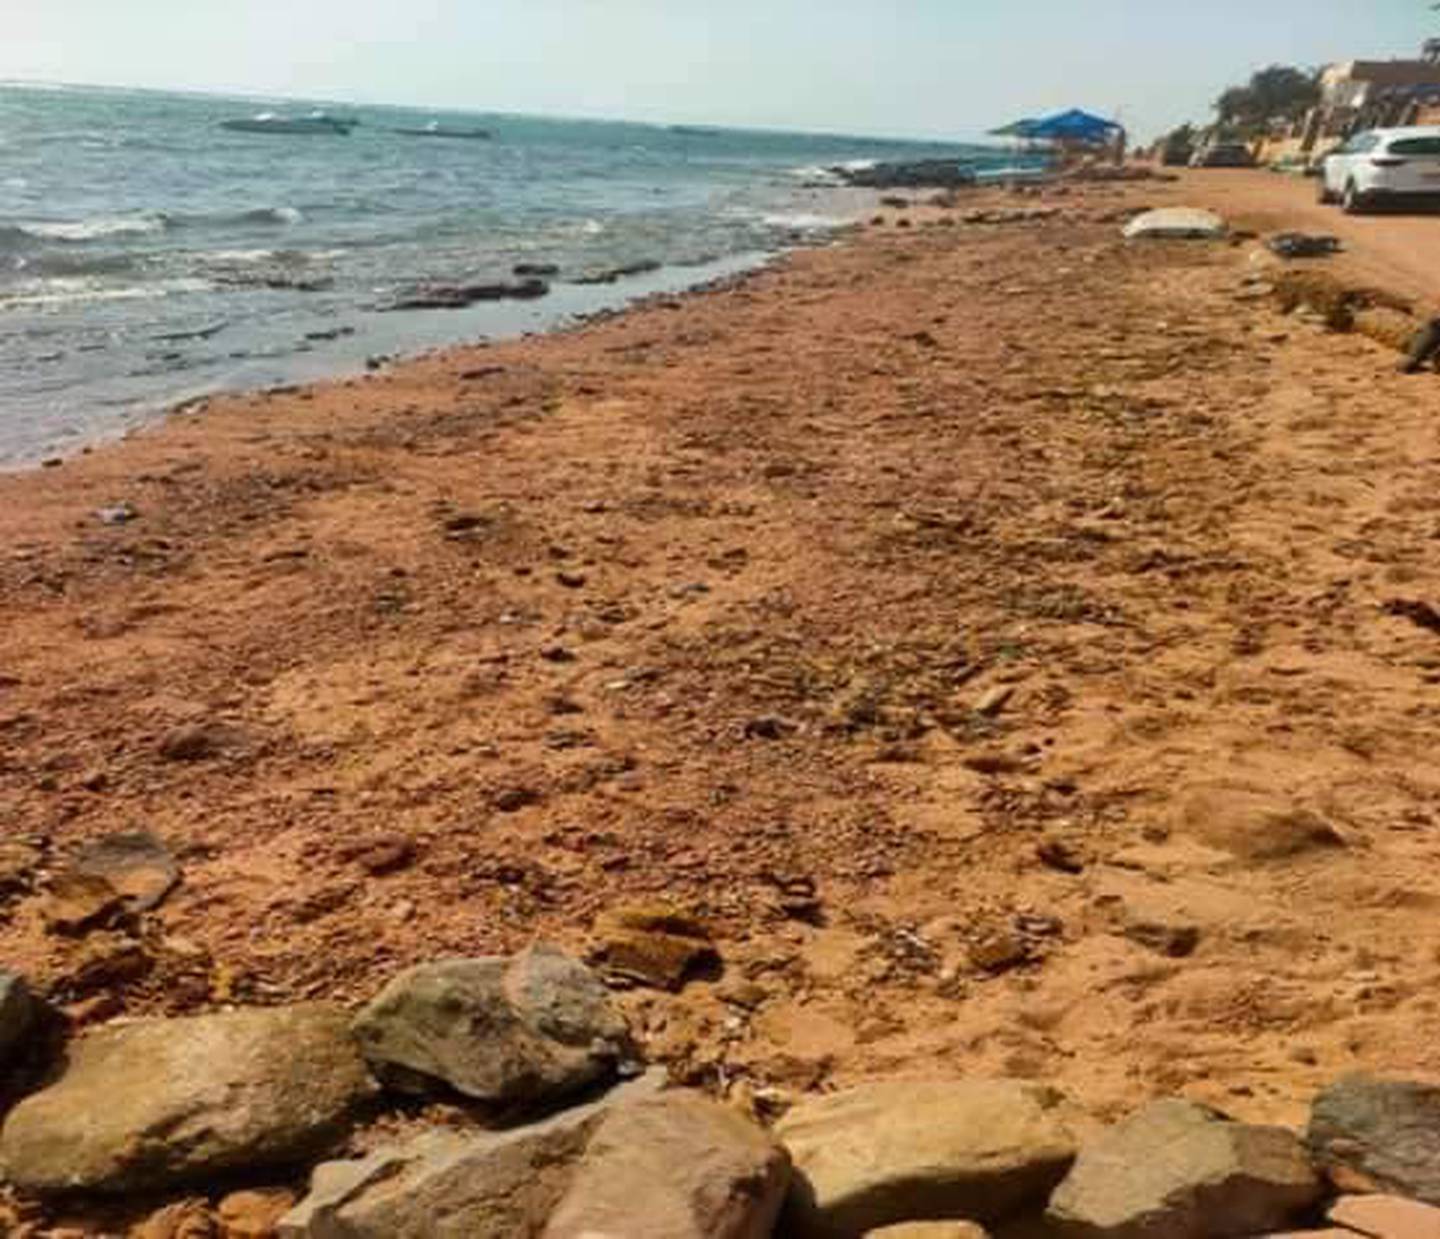 A beach in the Egyptian Red Sea beach town of Dahab where traces of crude oil were found following an oil spill near the Jordanian port city of Aqaba. Photo: Egypt's Ministry of Environment.